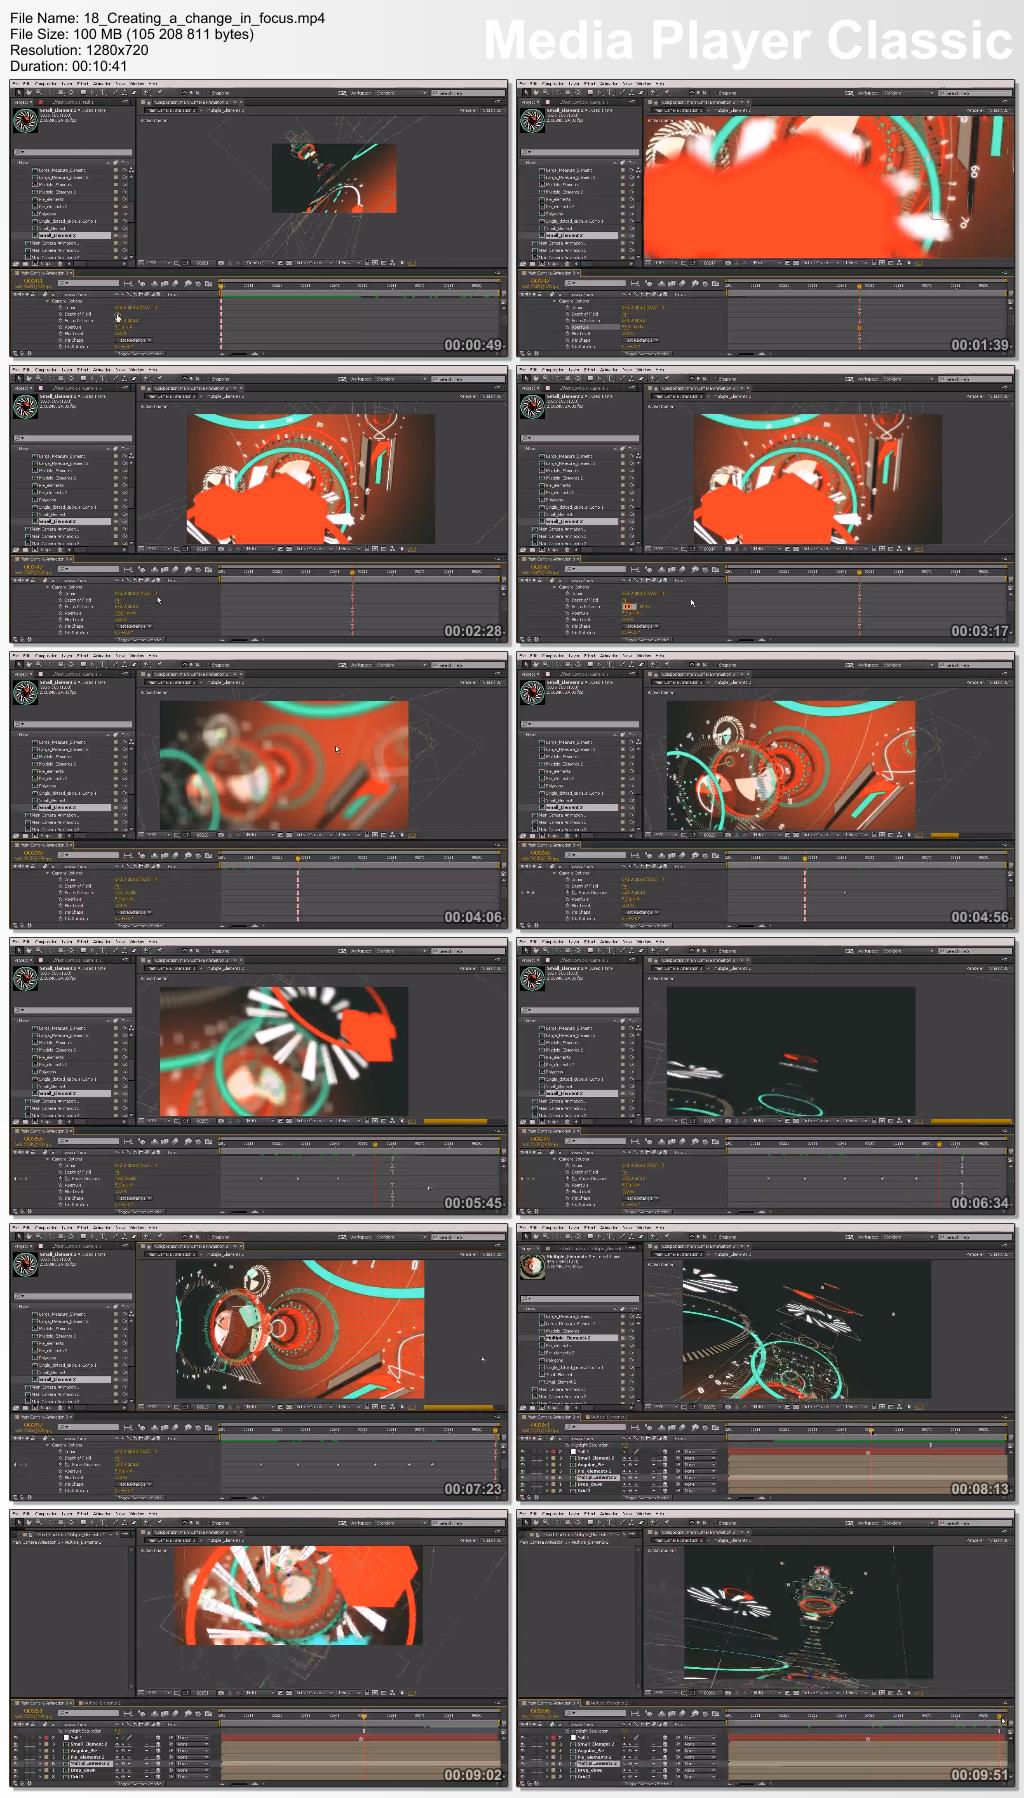 Dixxl Tuxxs - Building a Rigged Camera Composition in After Effects